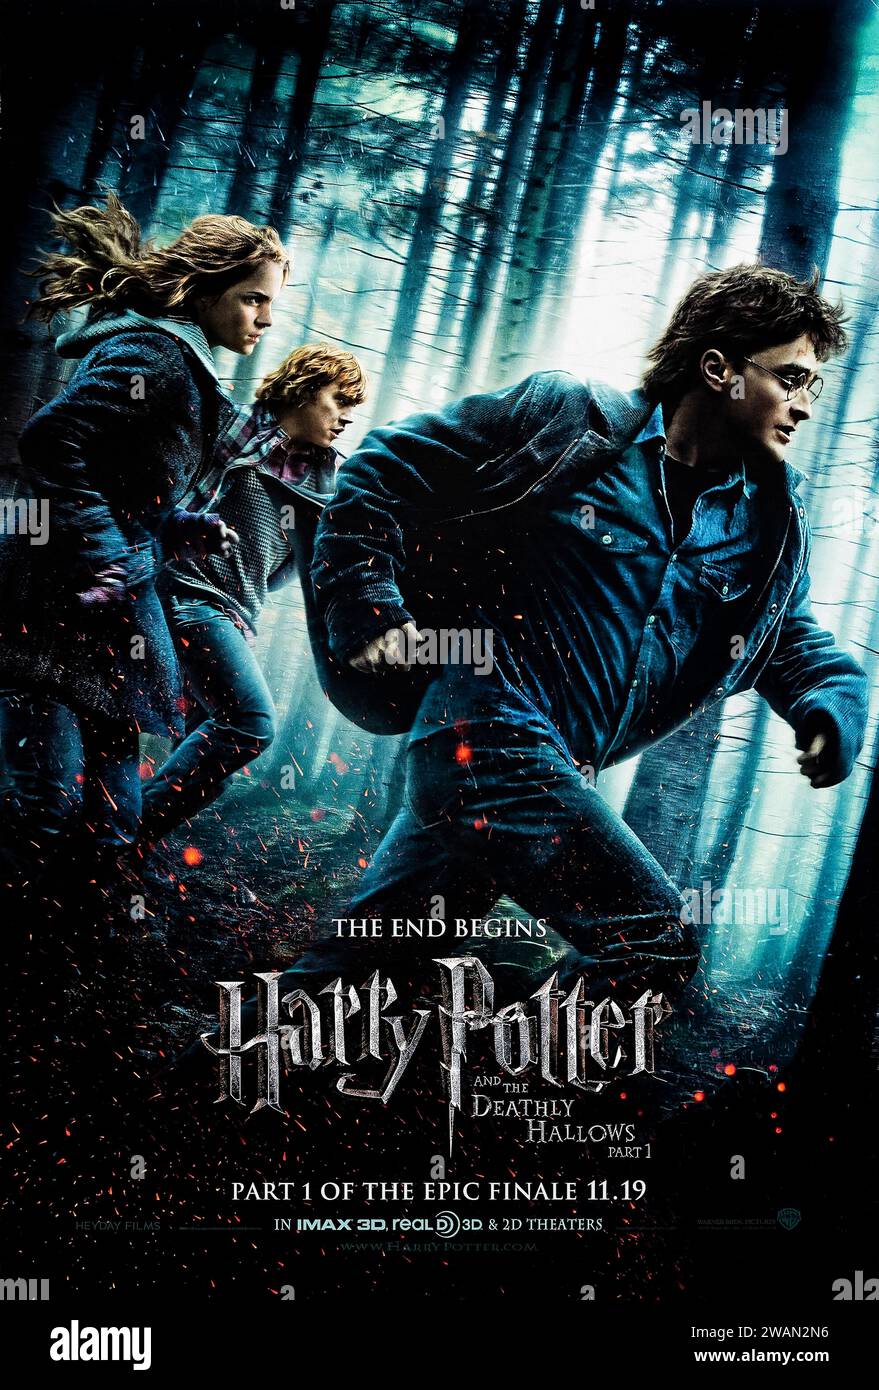 Harry Potter and the Deathly Hallows: Part 1 (2010) directed by David Yates and starring Daniel Radcliffe, Emma Watson and Rupert Grint. As Harry, Ron and Hermione race against time and evil to destroy the Horcruxes, they uncover the existence of the three most powerful objects in the wizarding world: the Deathly Hallows. Photograph of an original 2010 US advance poster. ***EDITORIAL USE ONLY*** Credit: BFA / Warner Bros Stock Photo